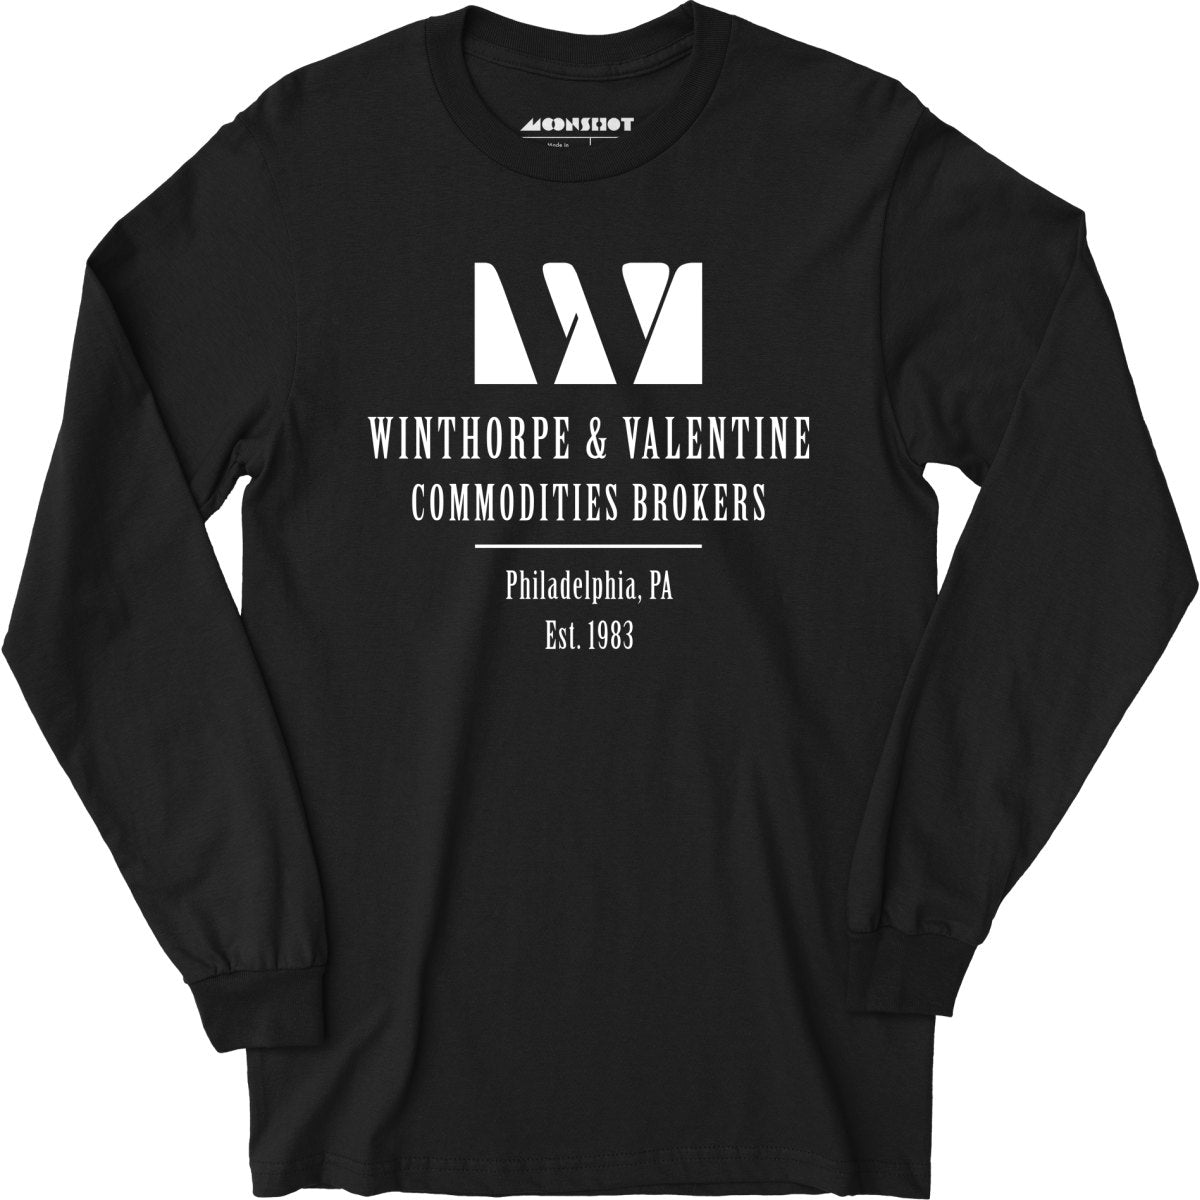 Winthorpe & Valentine Commodities Brokers - Long Sleeve T-Shirt